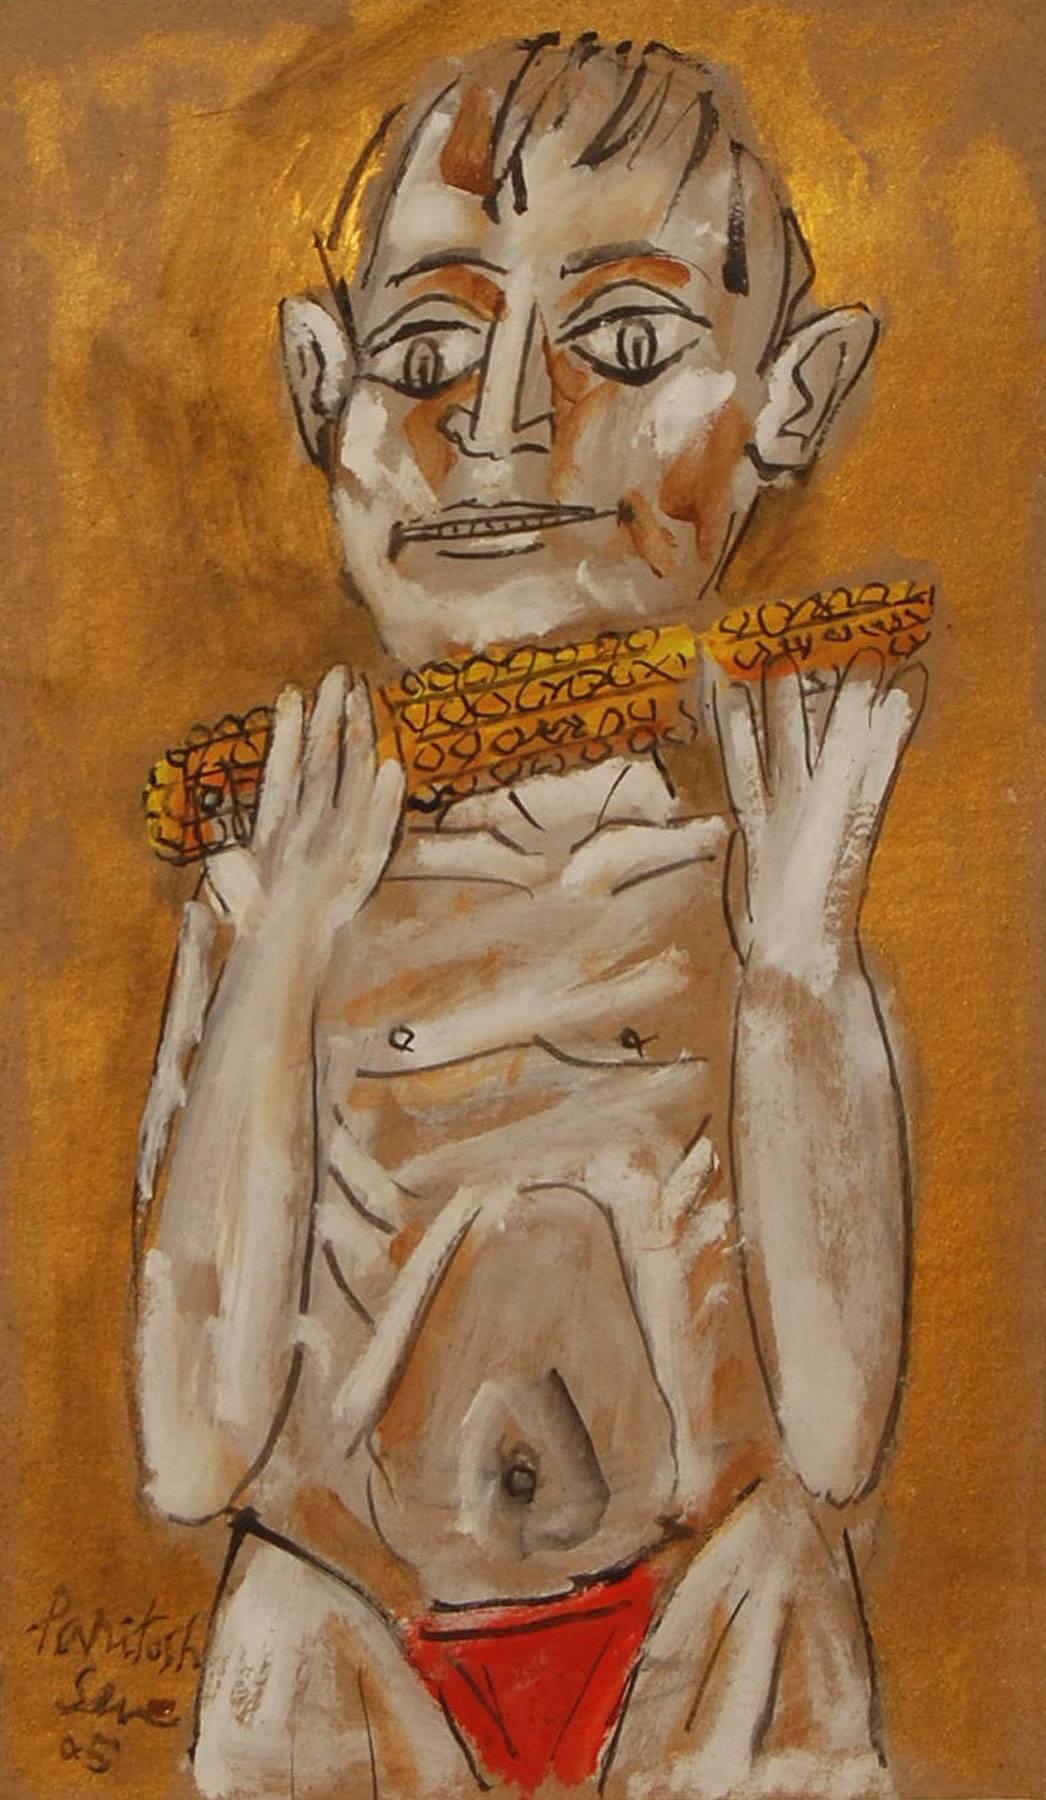 Boy eating Fruit & Corn, Acrylic, Indian Artist, Influenced by the great Picasso - Modern Mixed Media Art by Paritosh Sen